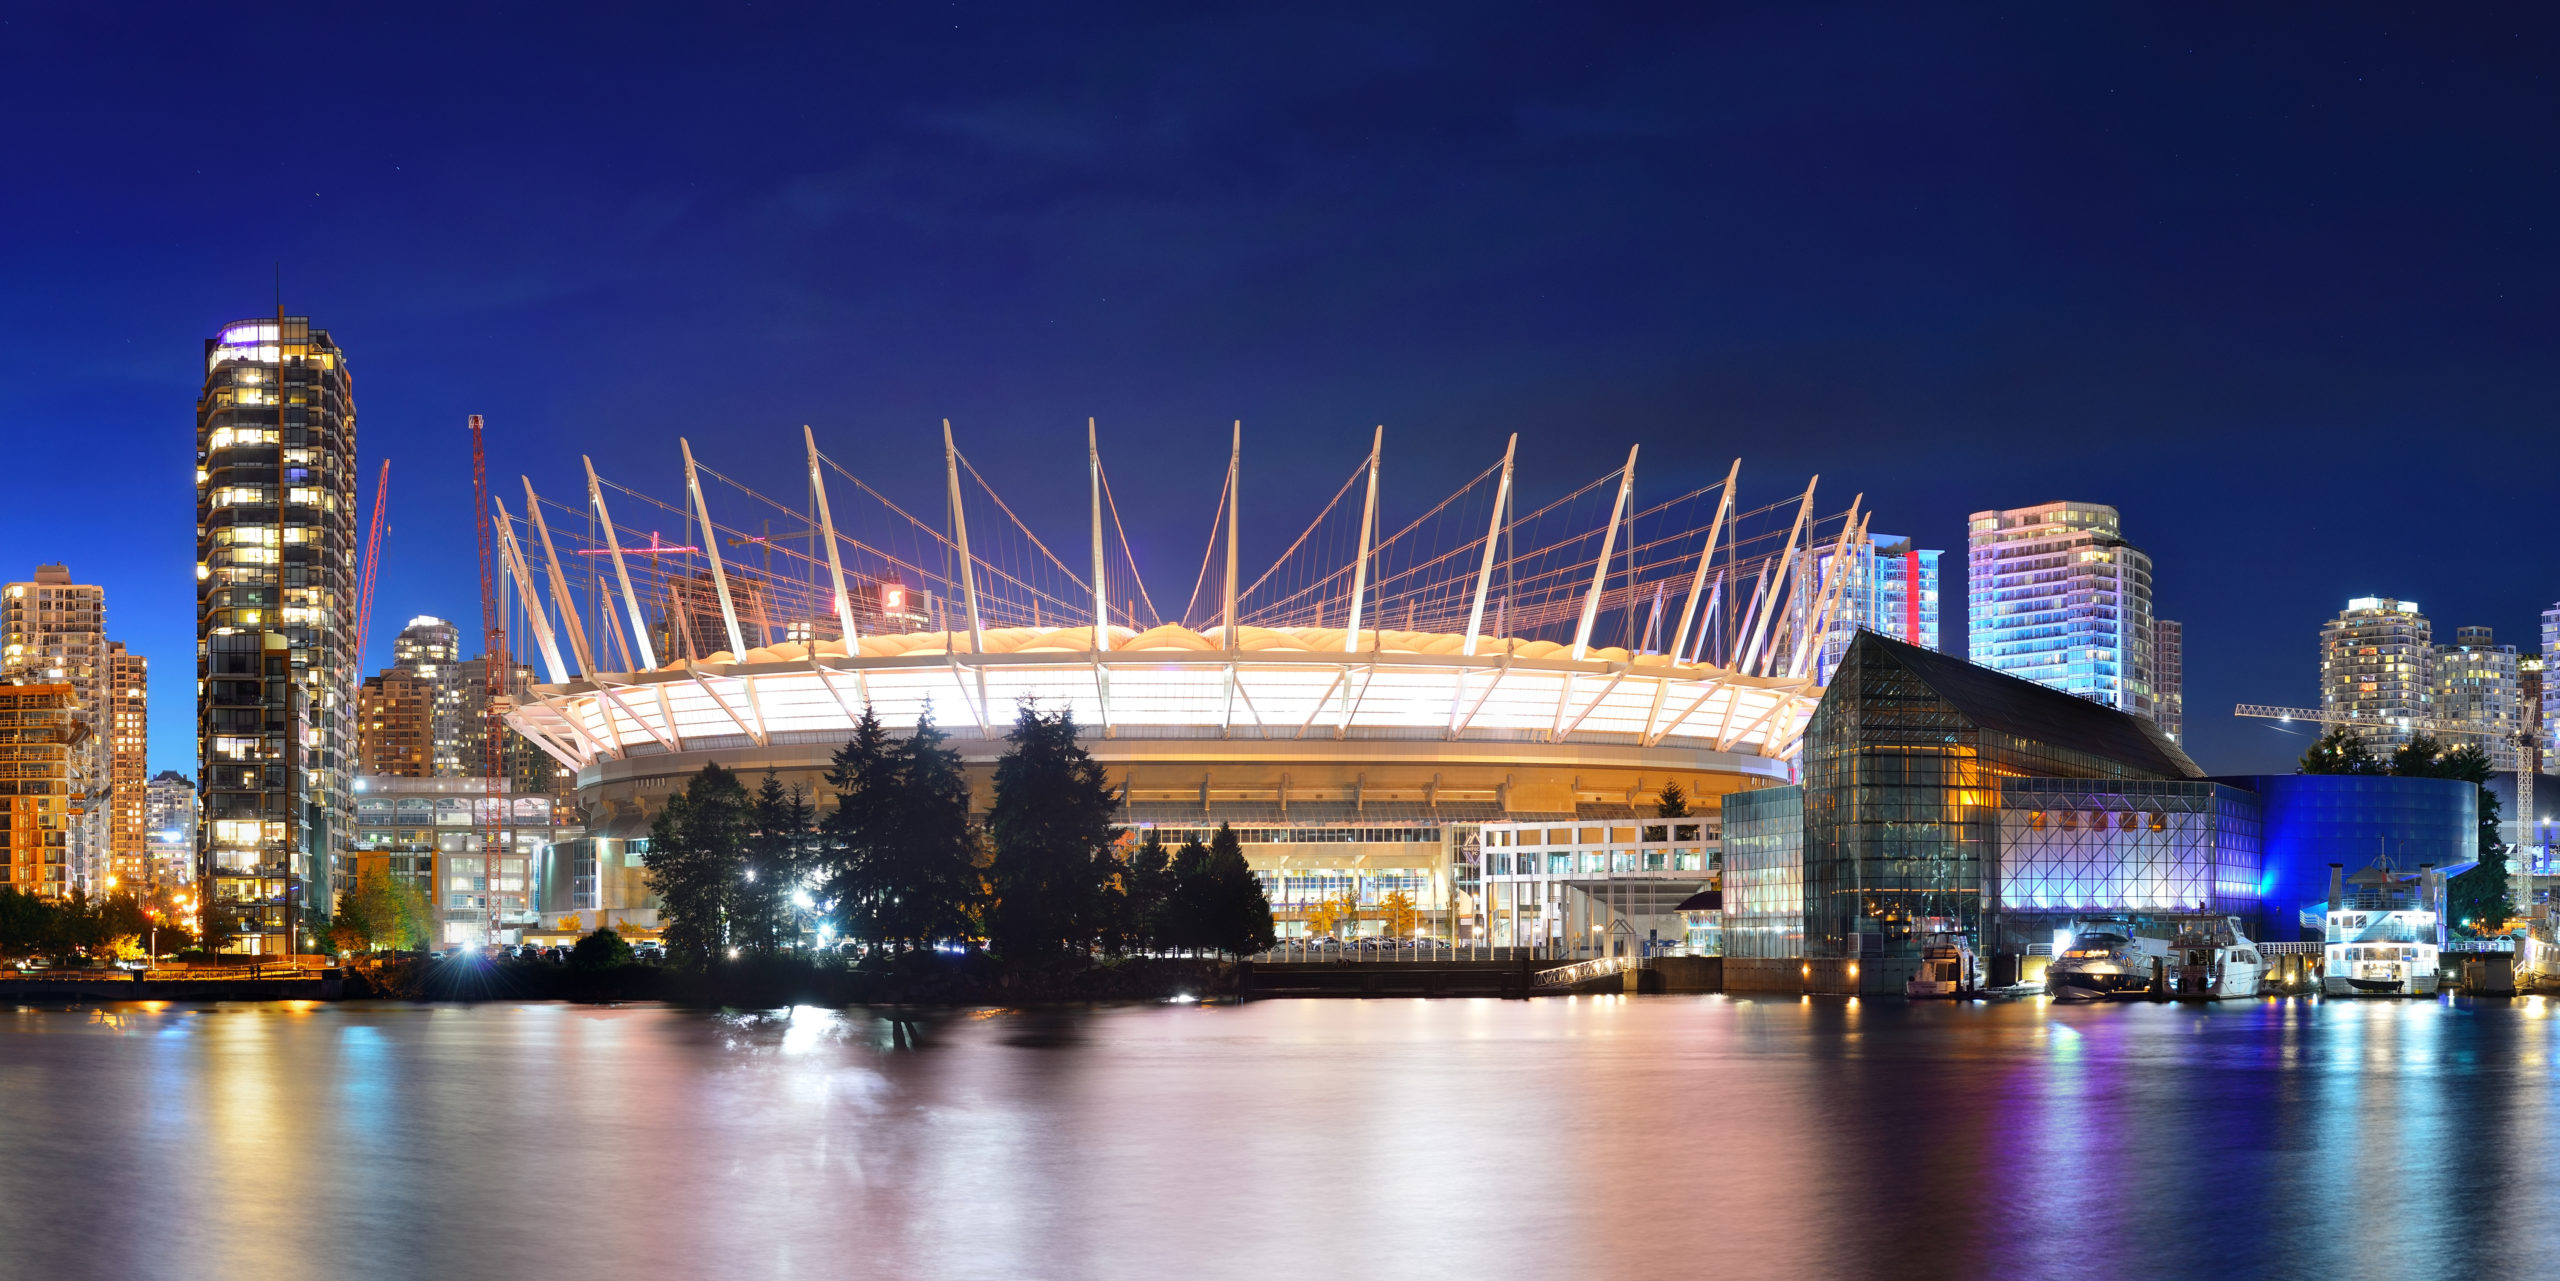 Vancouver officially being considered to host the FIFA World Cup 2026